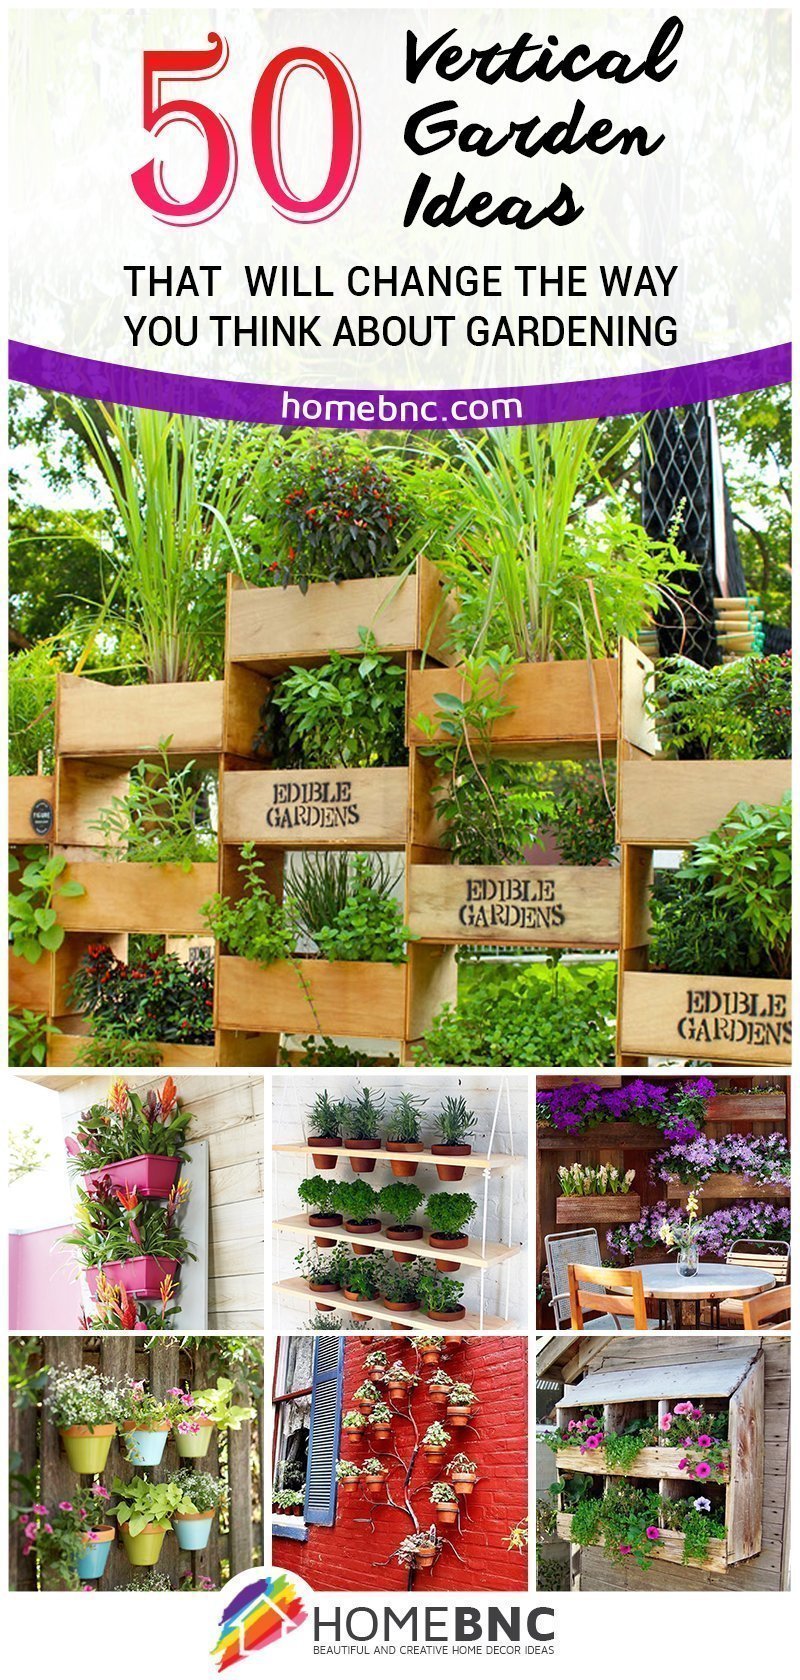 The 50 Best Vertical Garden Ideas and Designs for 2017